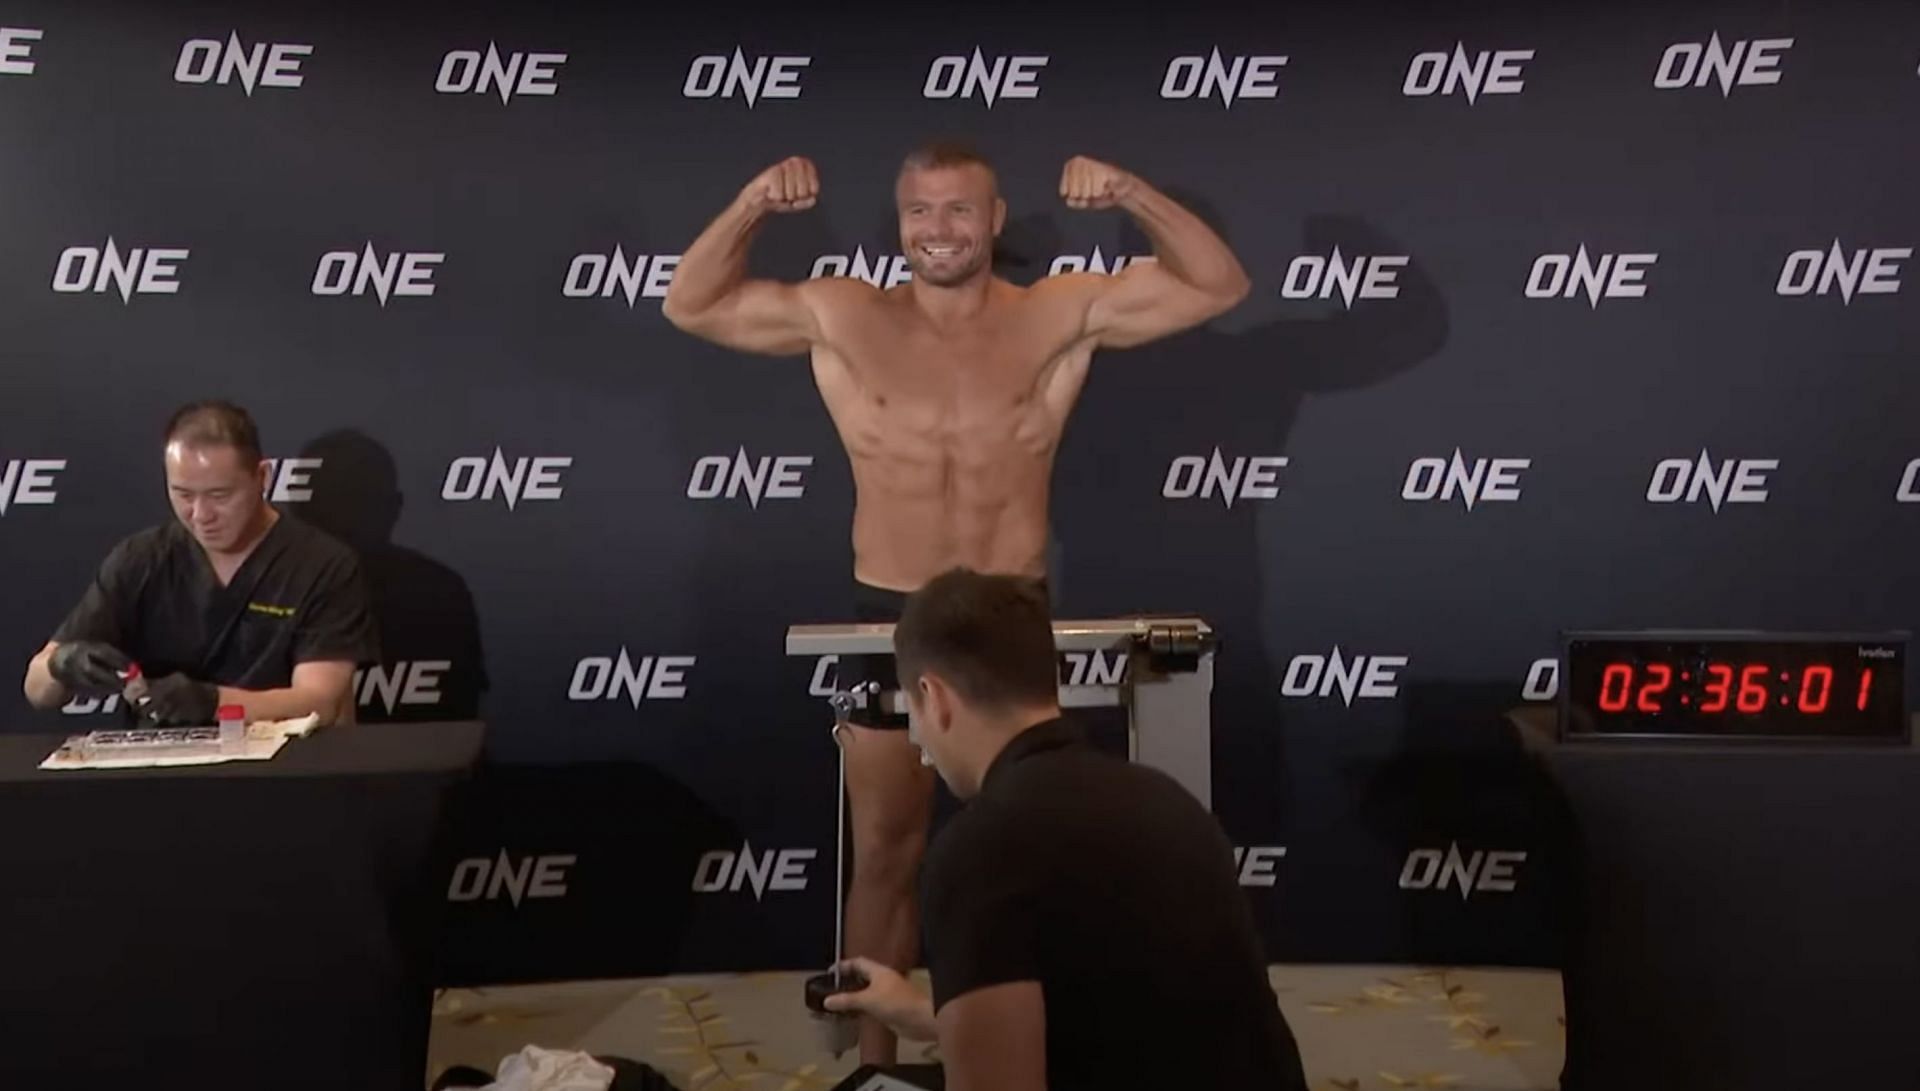 Anatoly Malykhin flexes at the ONE 166 weigh-ins in Doha.